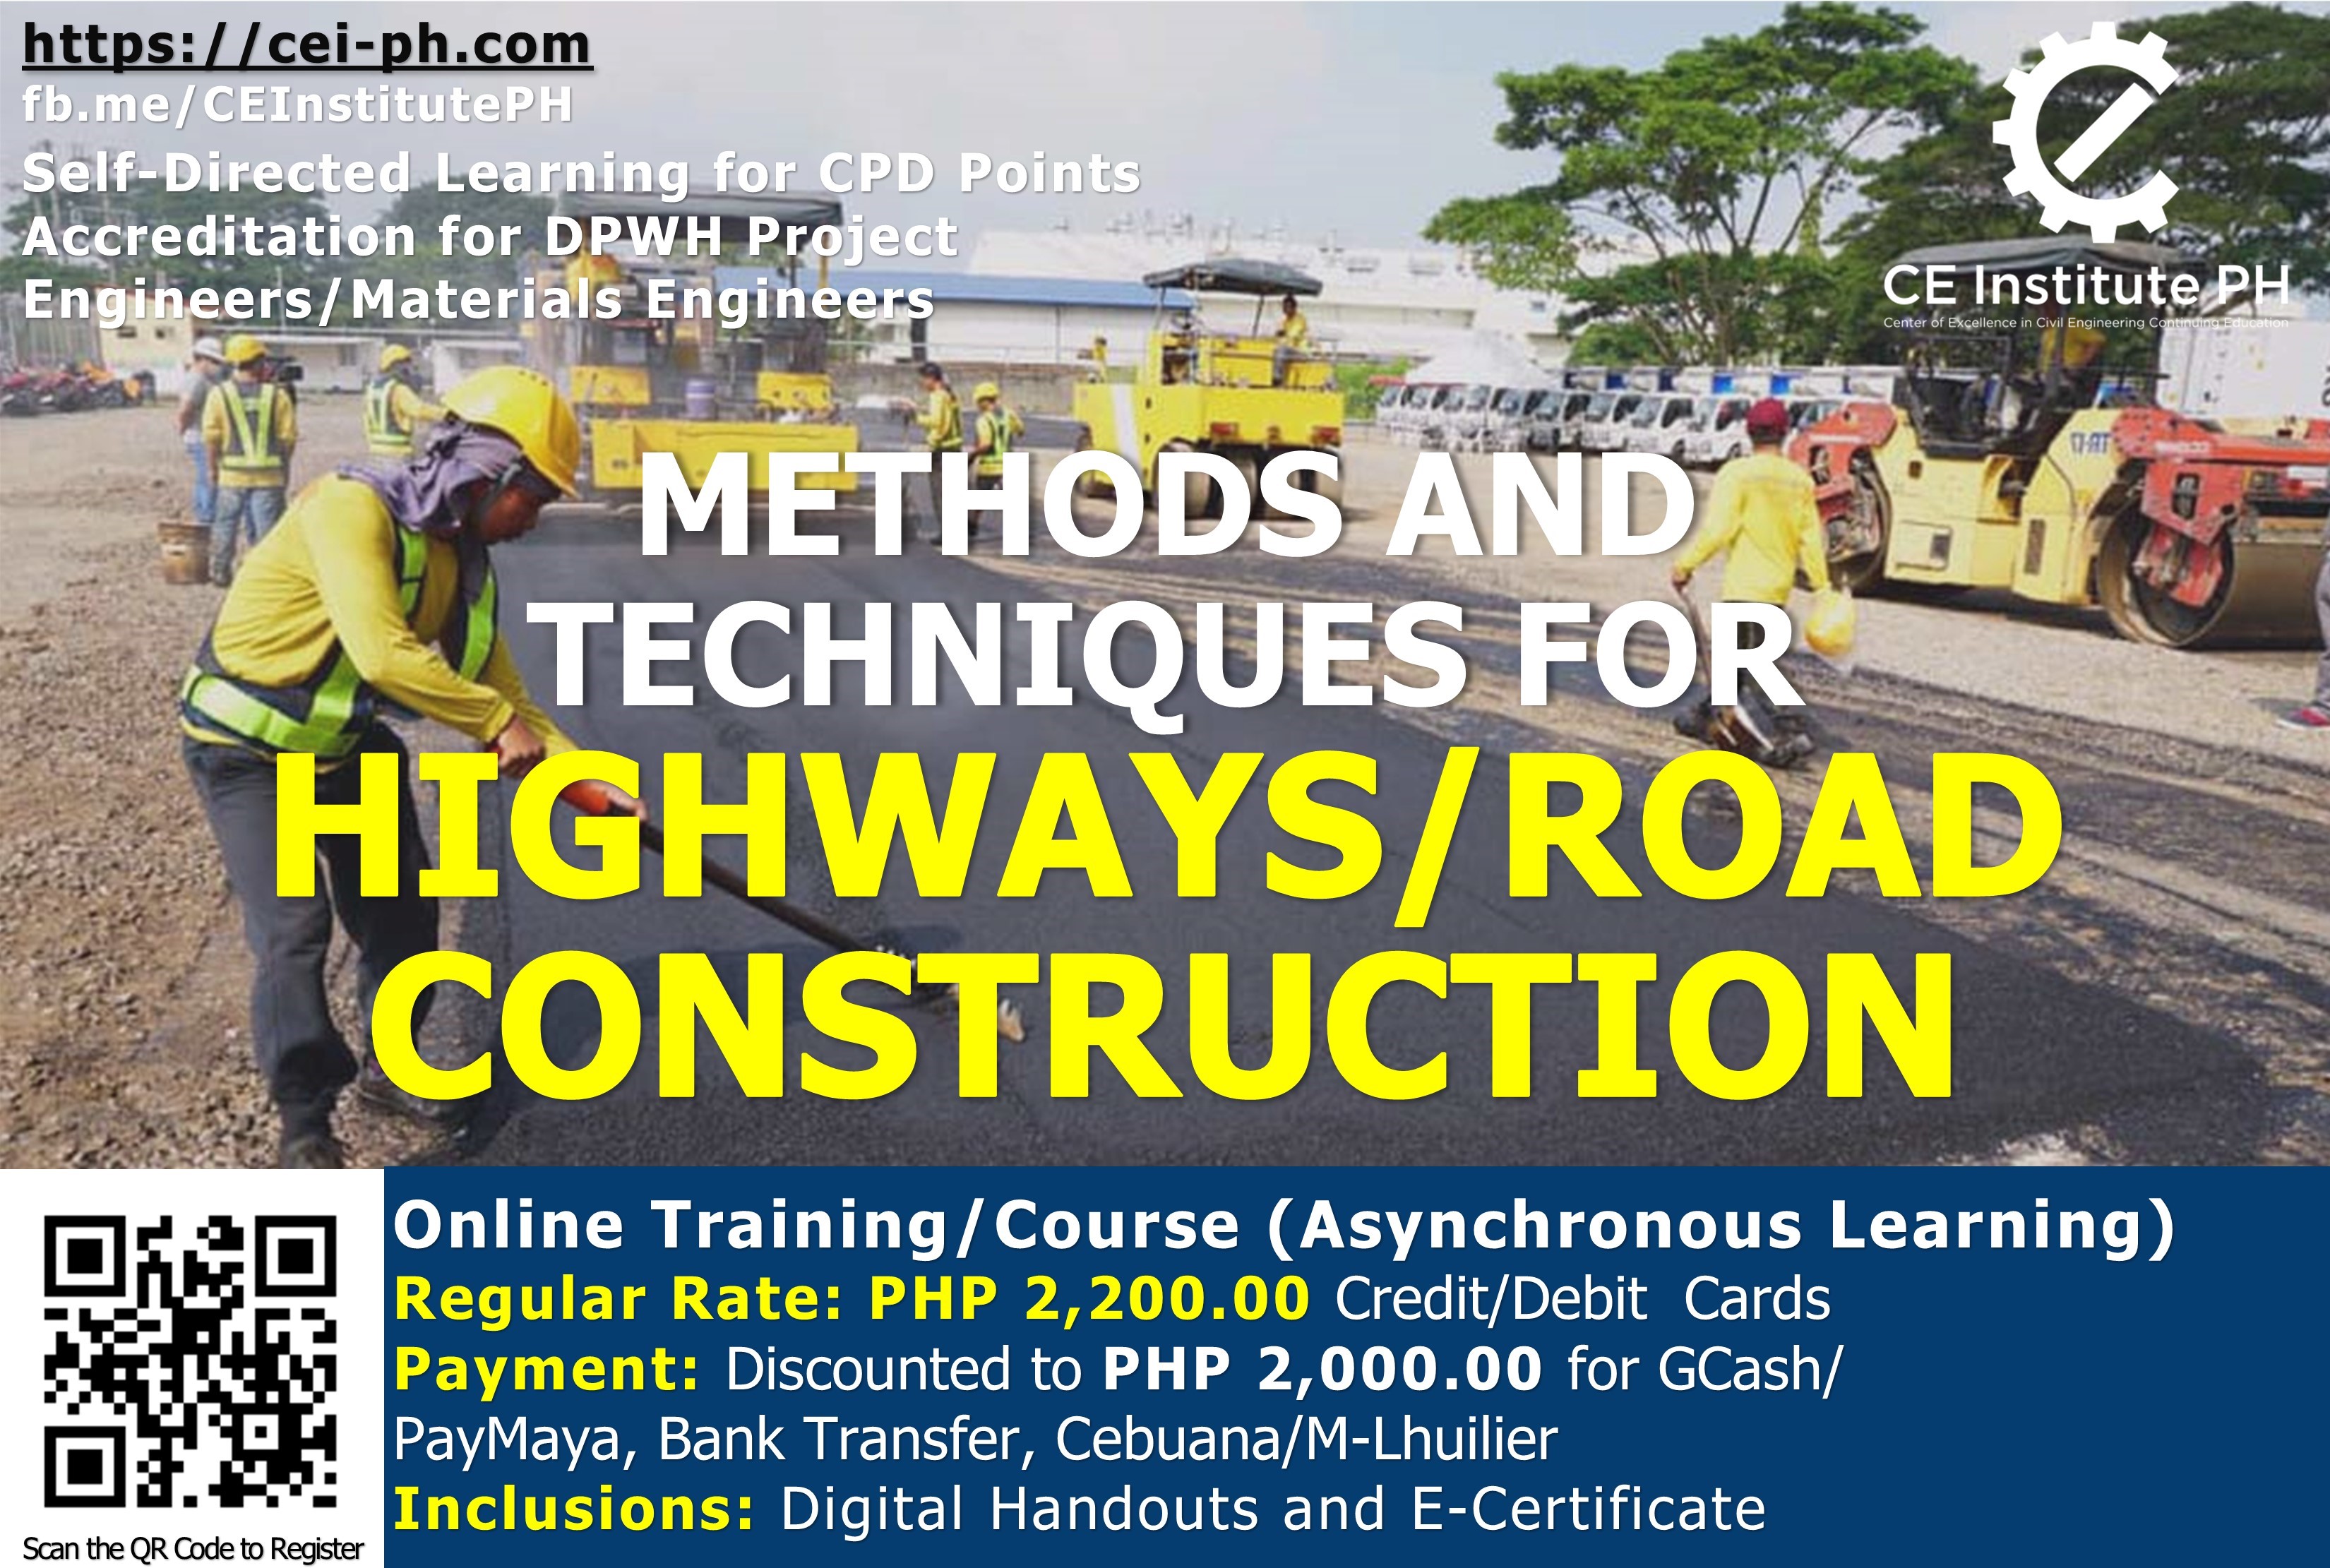 case study on road construction